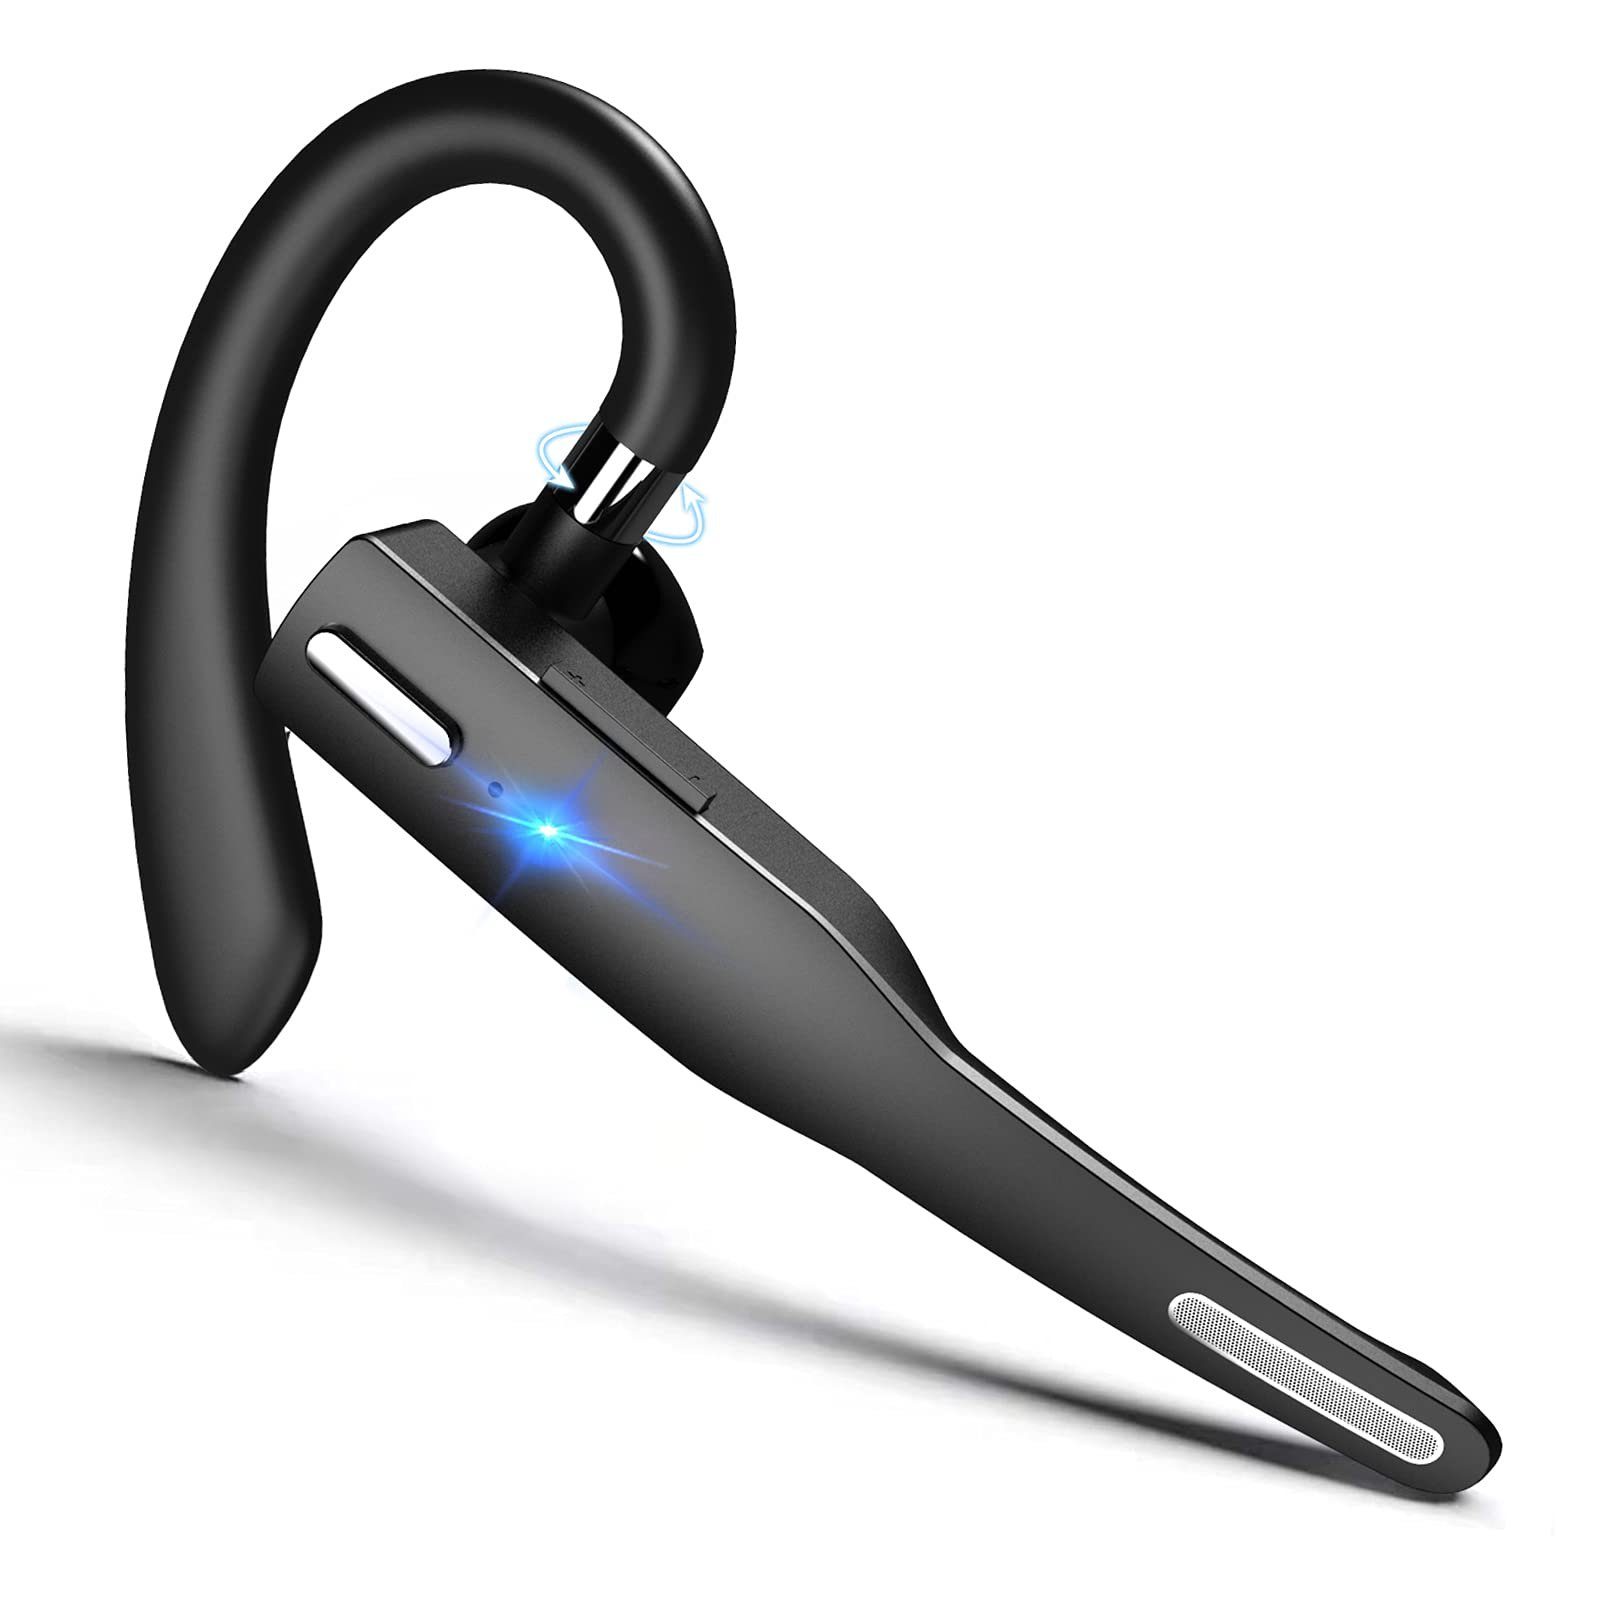 integriertes Mikrofon 3D-Rauschunterdrückung kompatibel mit/Huawei/Android/AirPods/iPhone Stereo-In-Ear-Sport-Headset mit tragbarer Ladetasche kabelloses Headset TIANGONG Bluetooth-Headset 5.0 